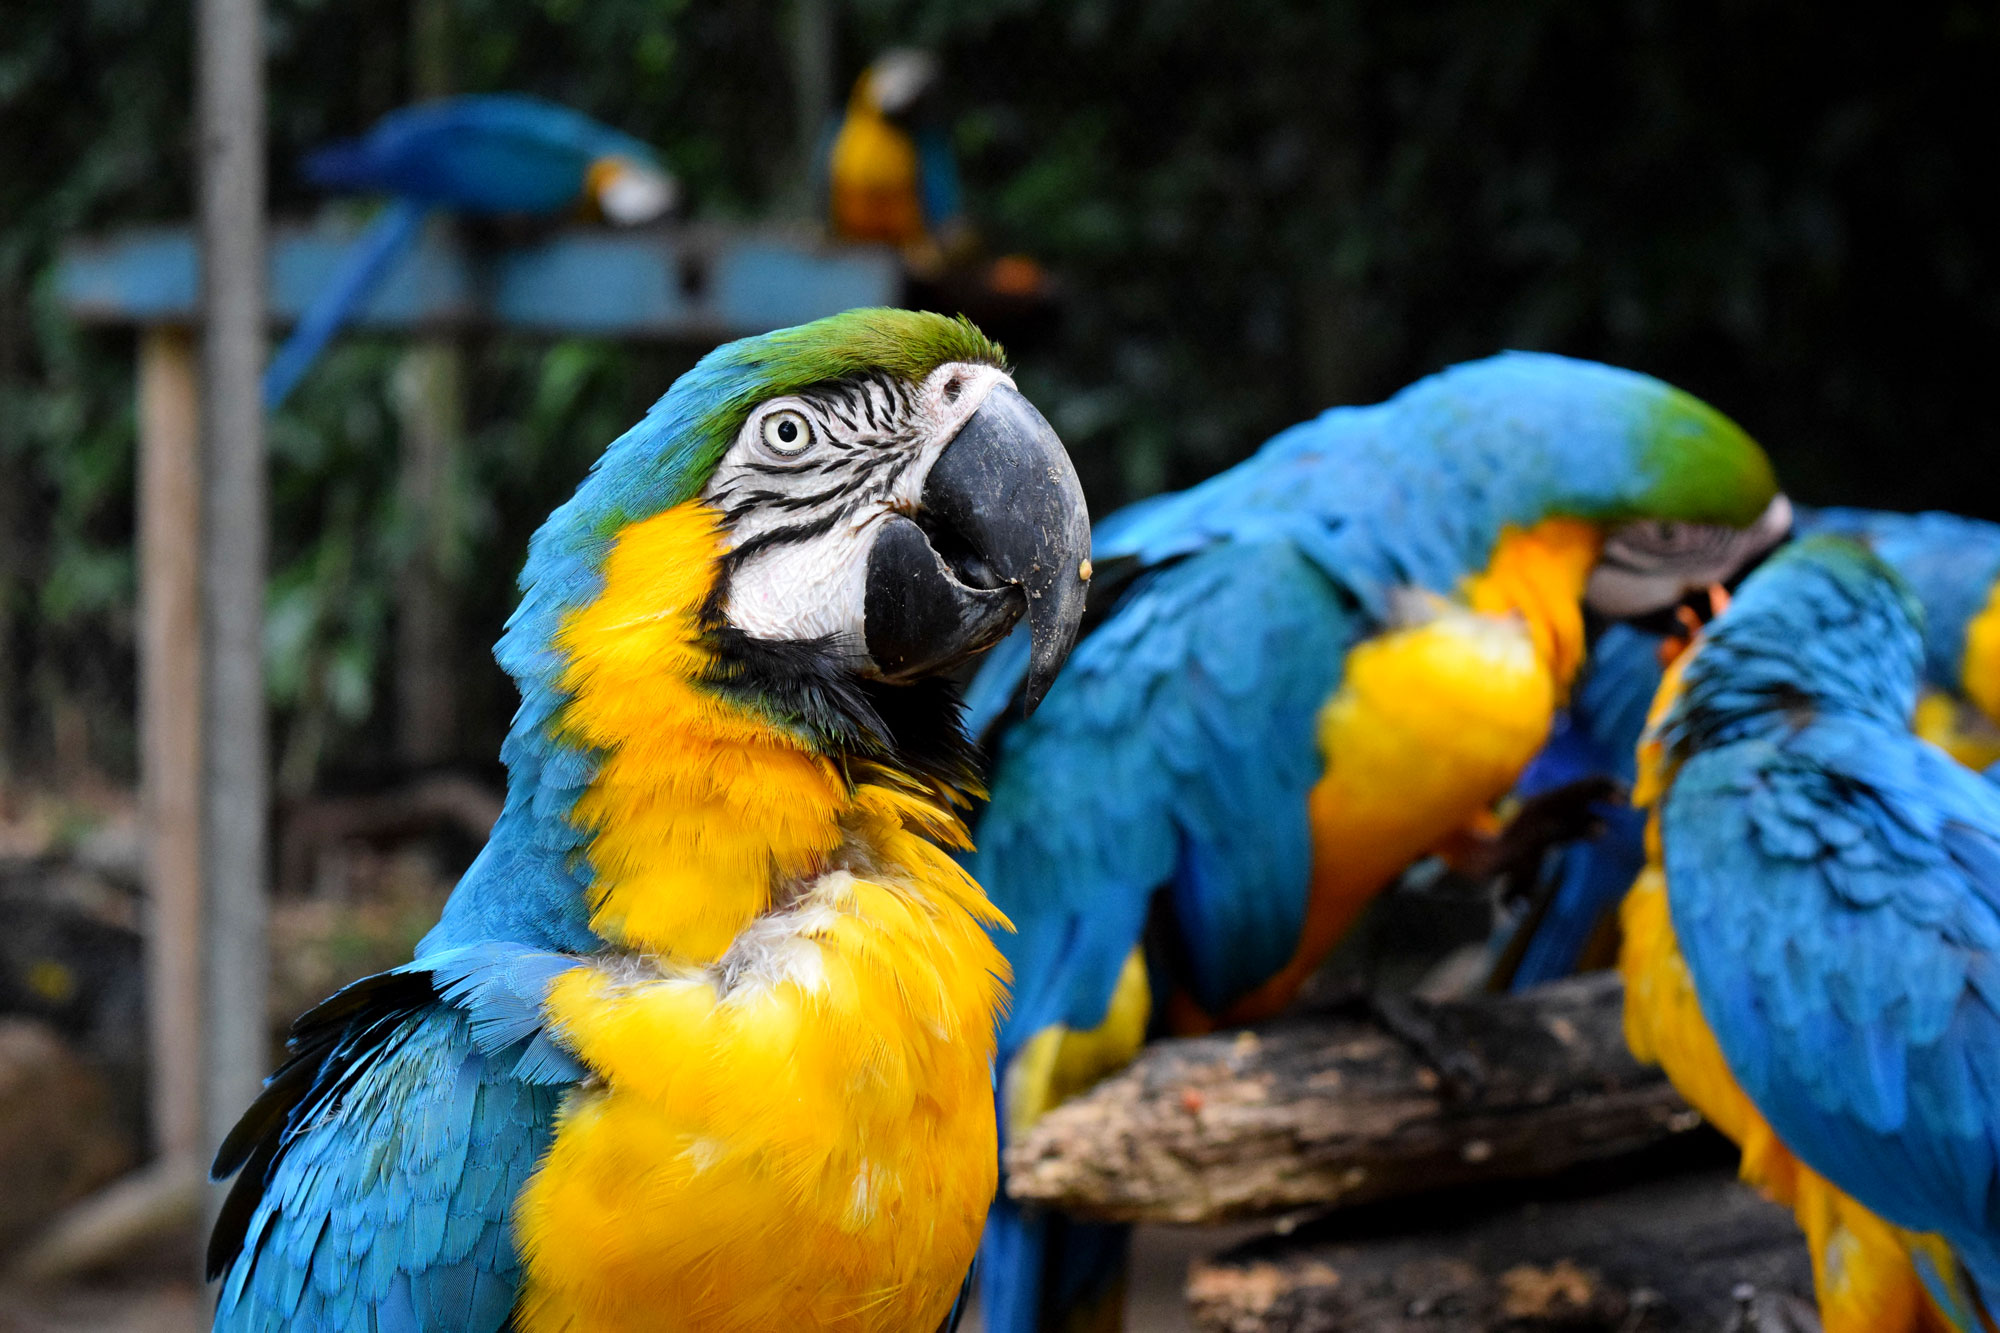 Rescued macaws at a wildlife triage center in Rio are being prepped for release into Tijuca National Park as part of a unique rewilding effort that is attempting to bring the park's entire ecosystem back to life. Photo by Bernardo Araujo.